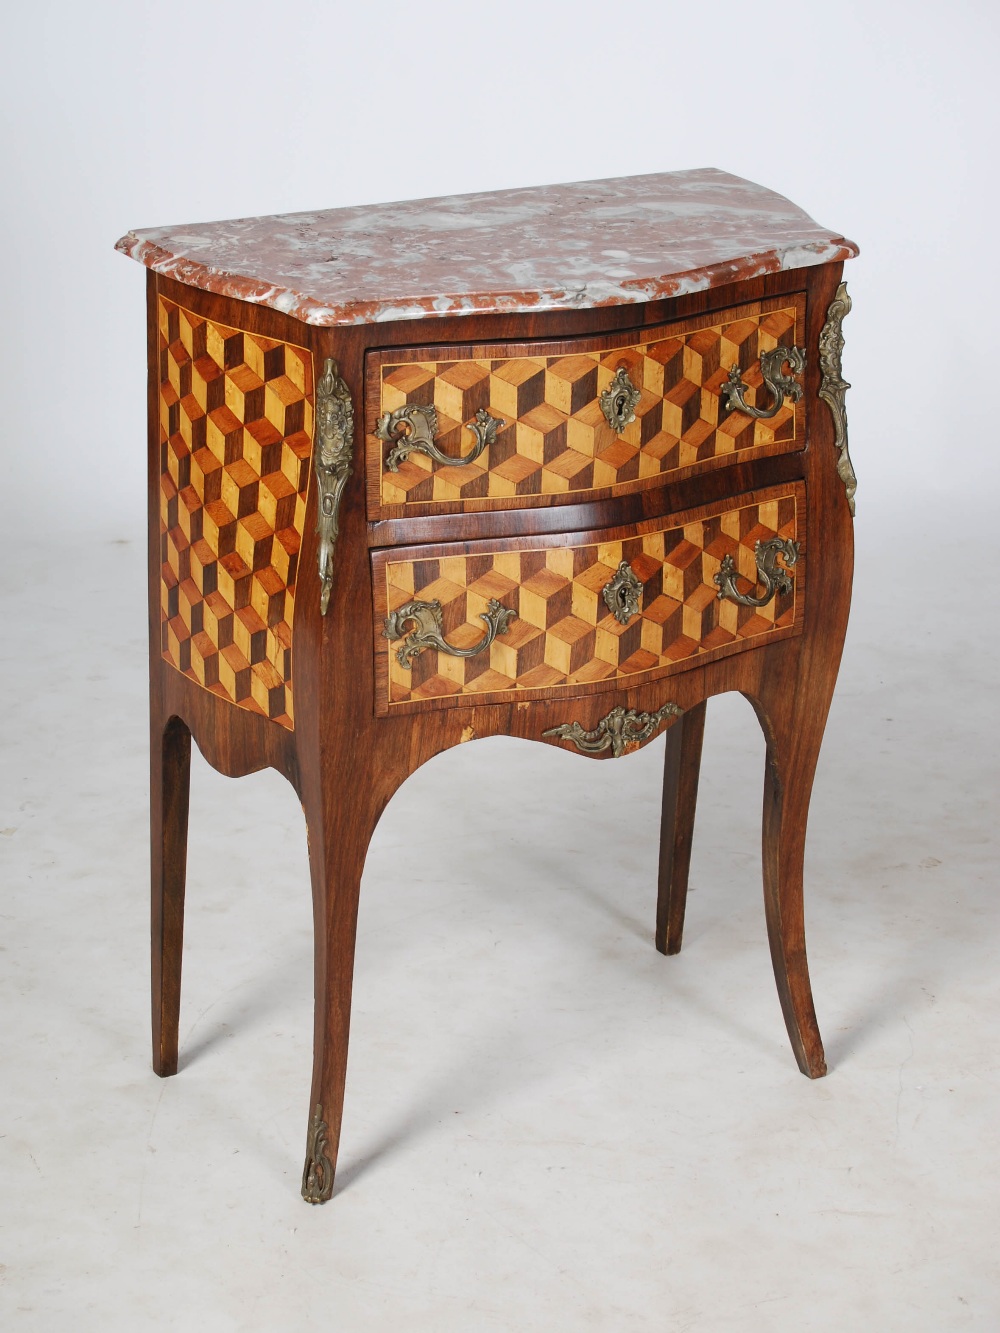 A late 19th century French kingwood, parquetry and gilt metal mounted commode, the red and white